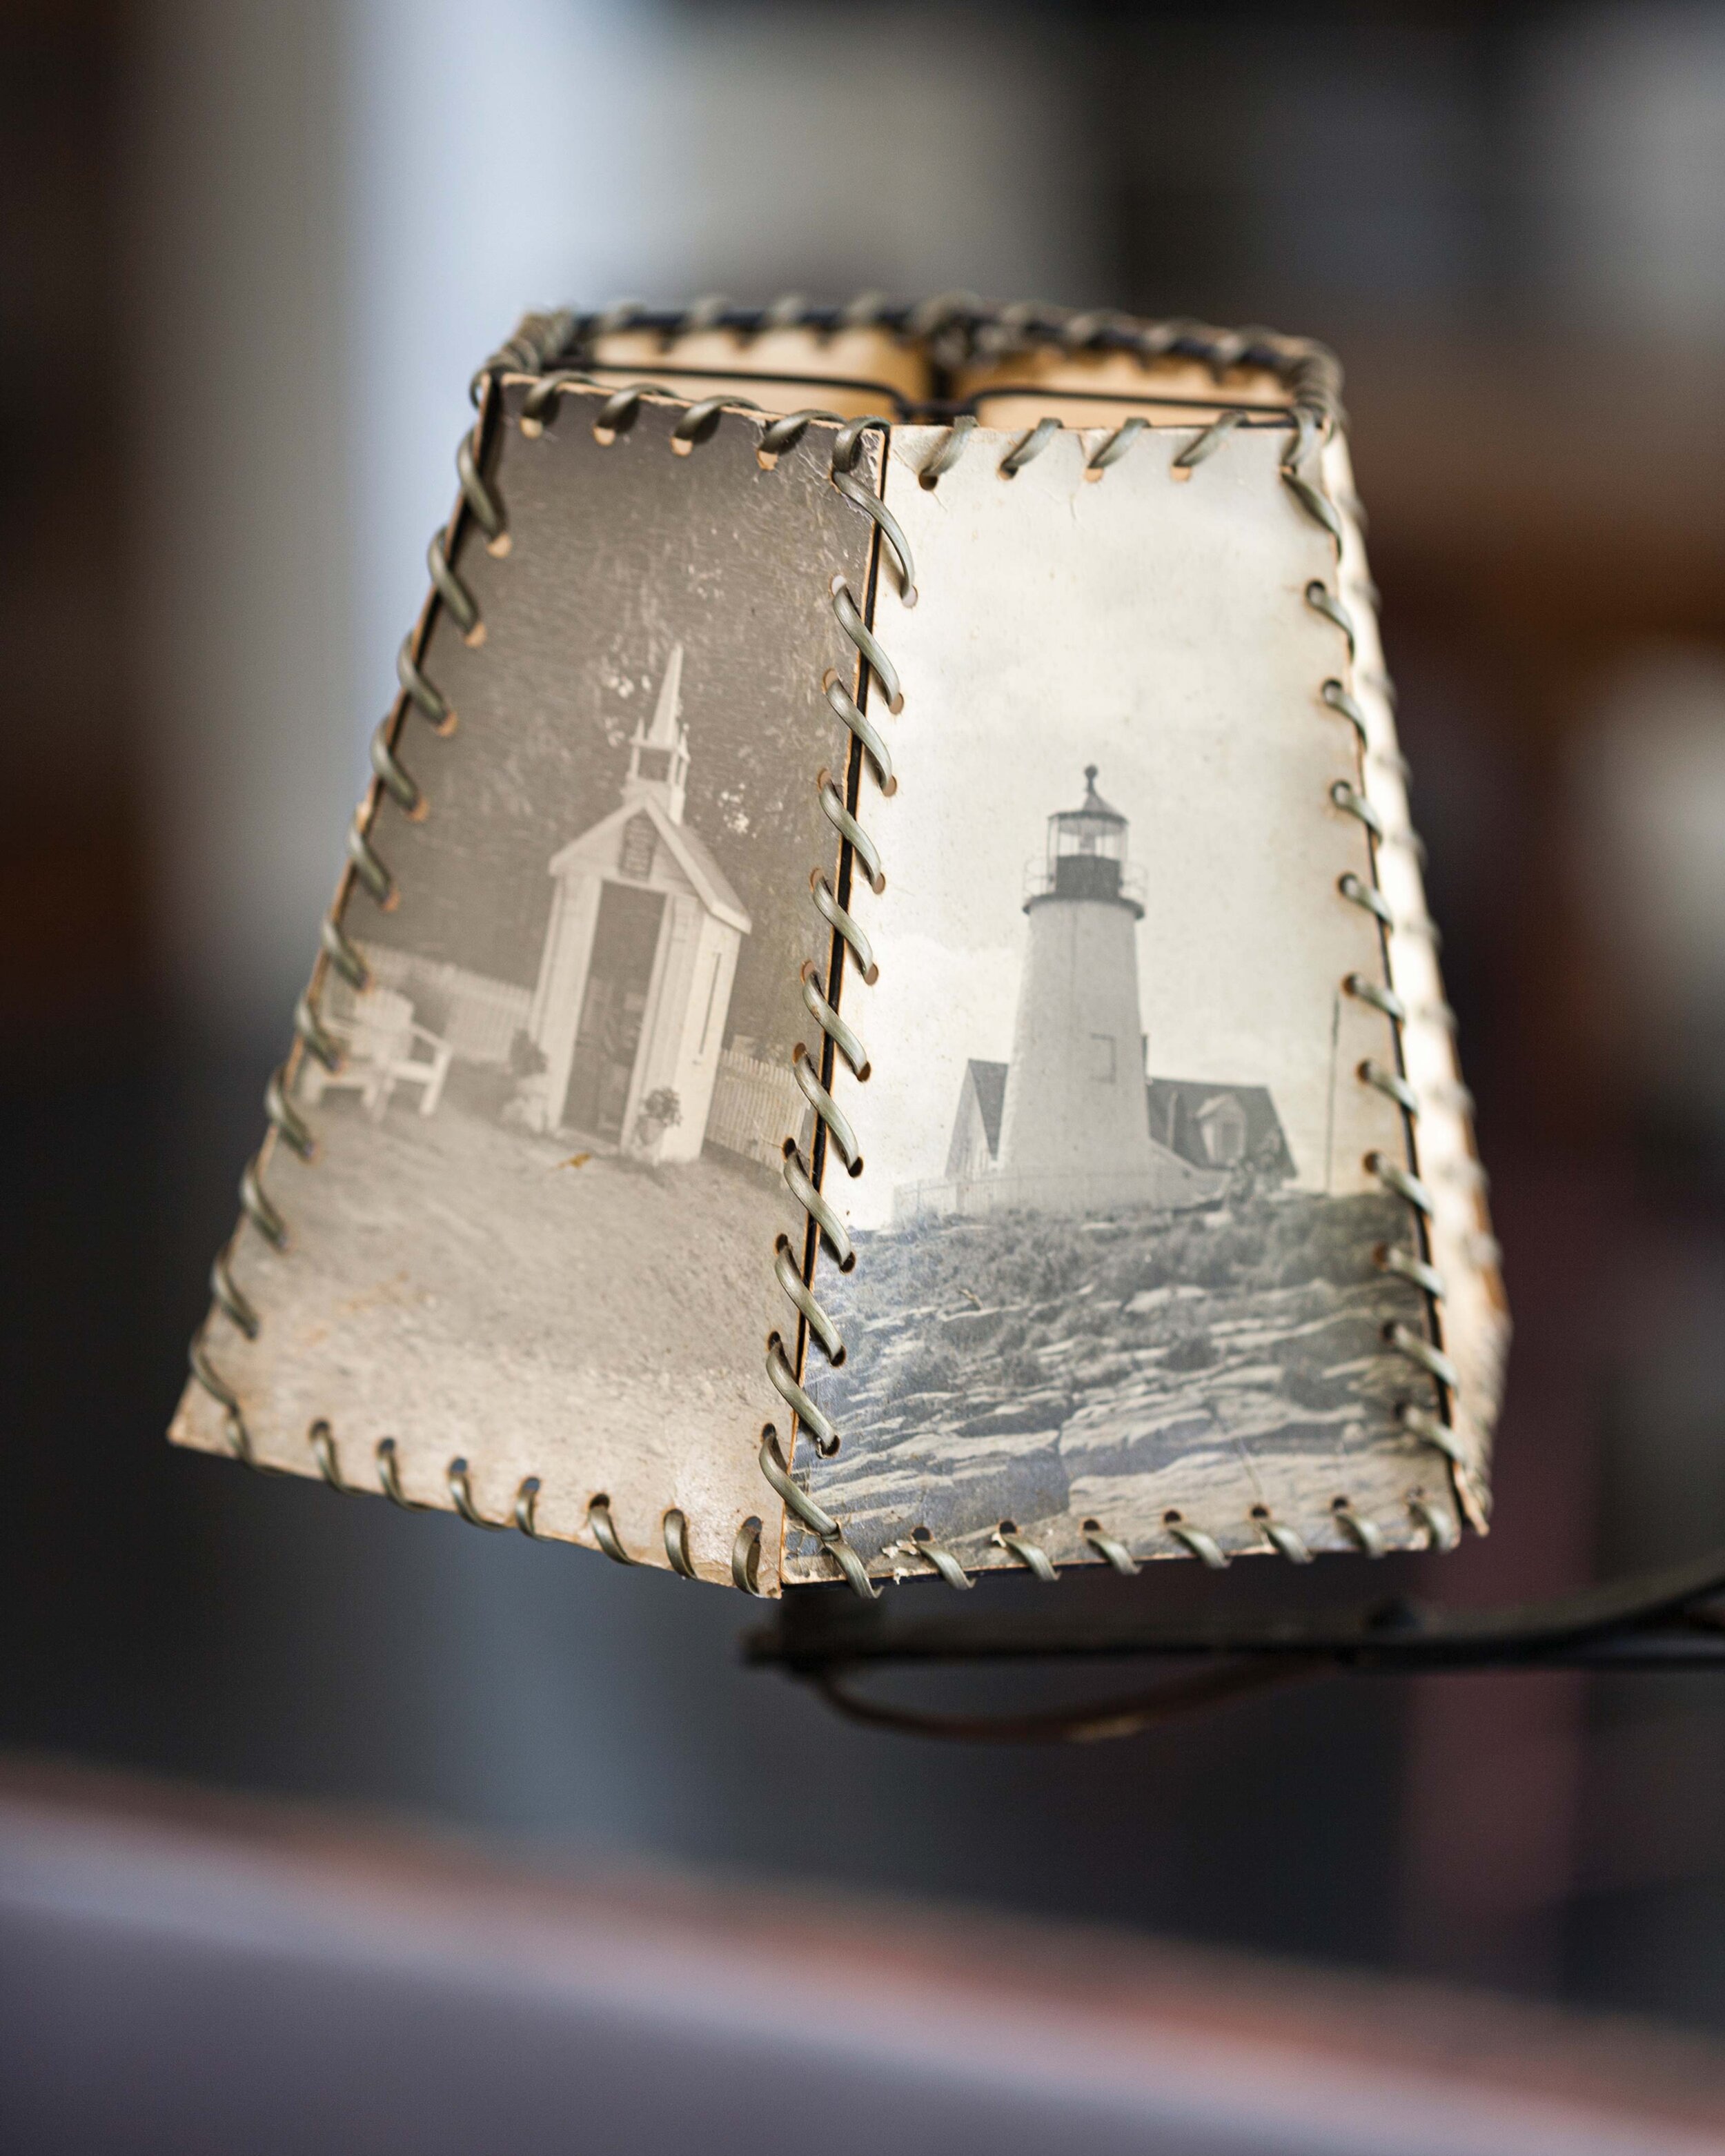  The lampshade, stitched together from vintage photographs of Maine, completes a wrought iron reading lamp. 